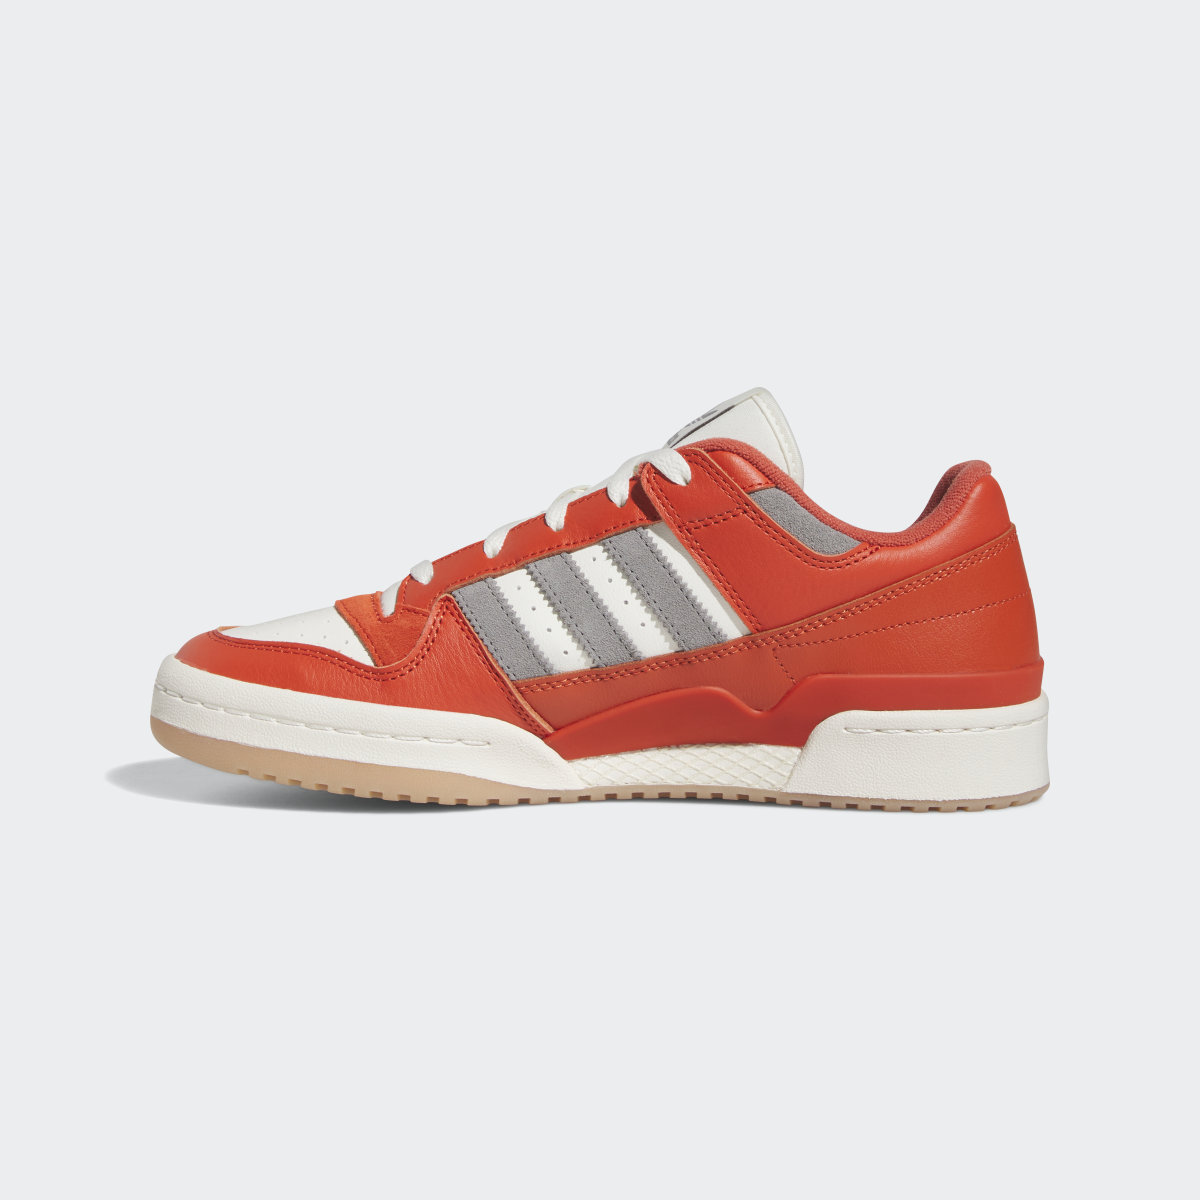 Adidas Forum Low Classic Shoes. 7